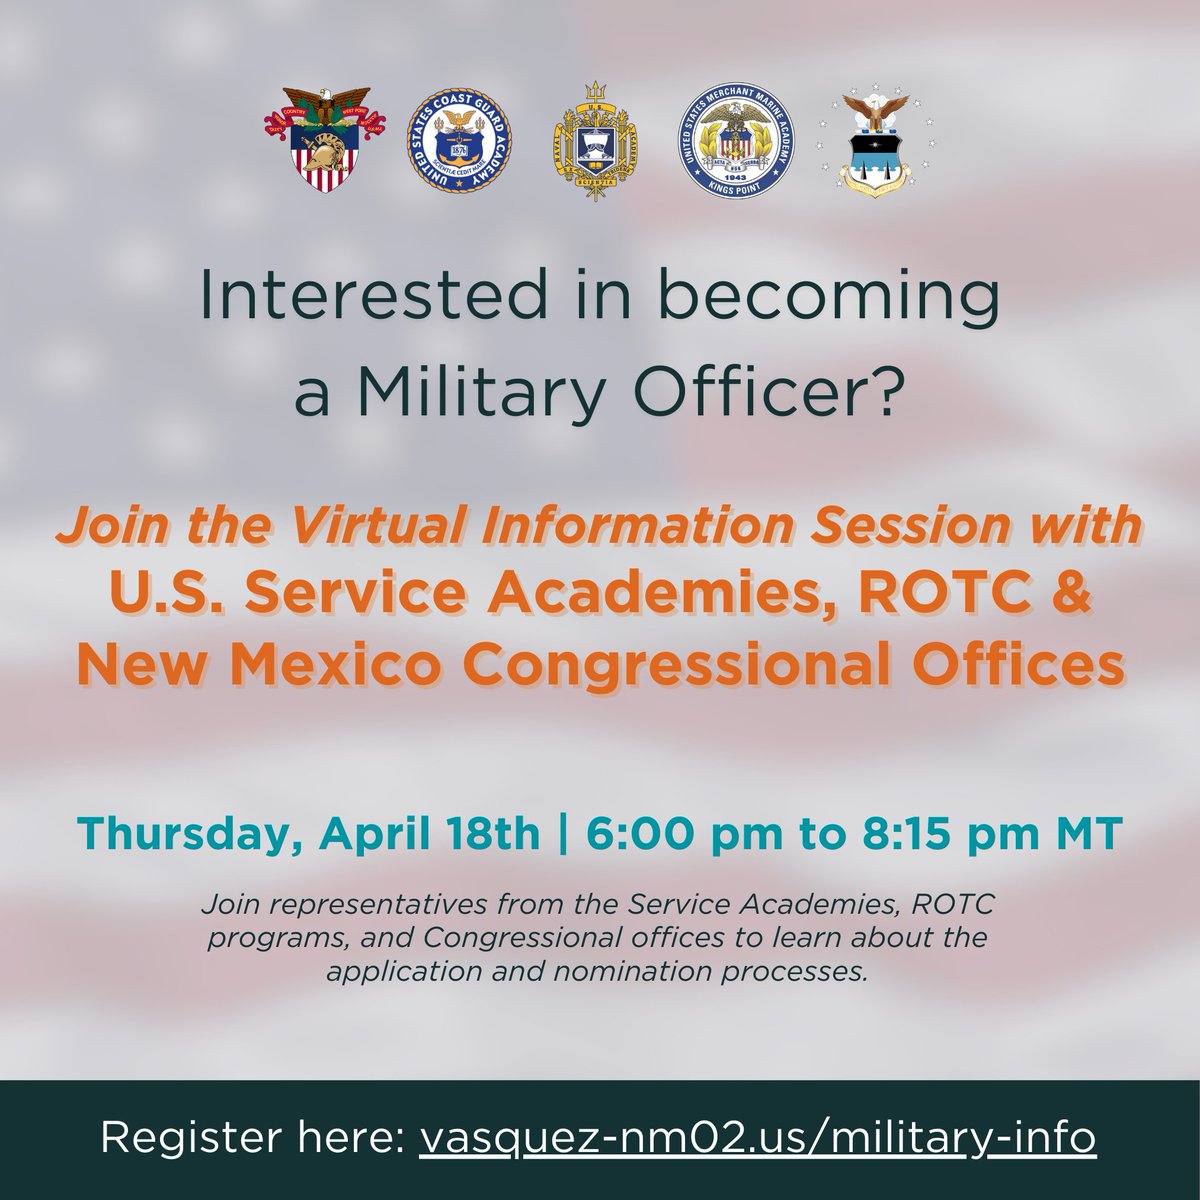 Are you a high school student interested in attending a U.S. Service Academy? Join a virtual information session on April 18th at 6pm MT to learn more about the nomination process and talk directly with academy representatives. Learn more at: vasquez-nm02.us/military-info